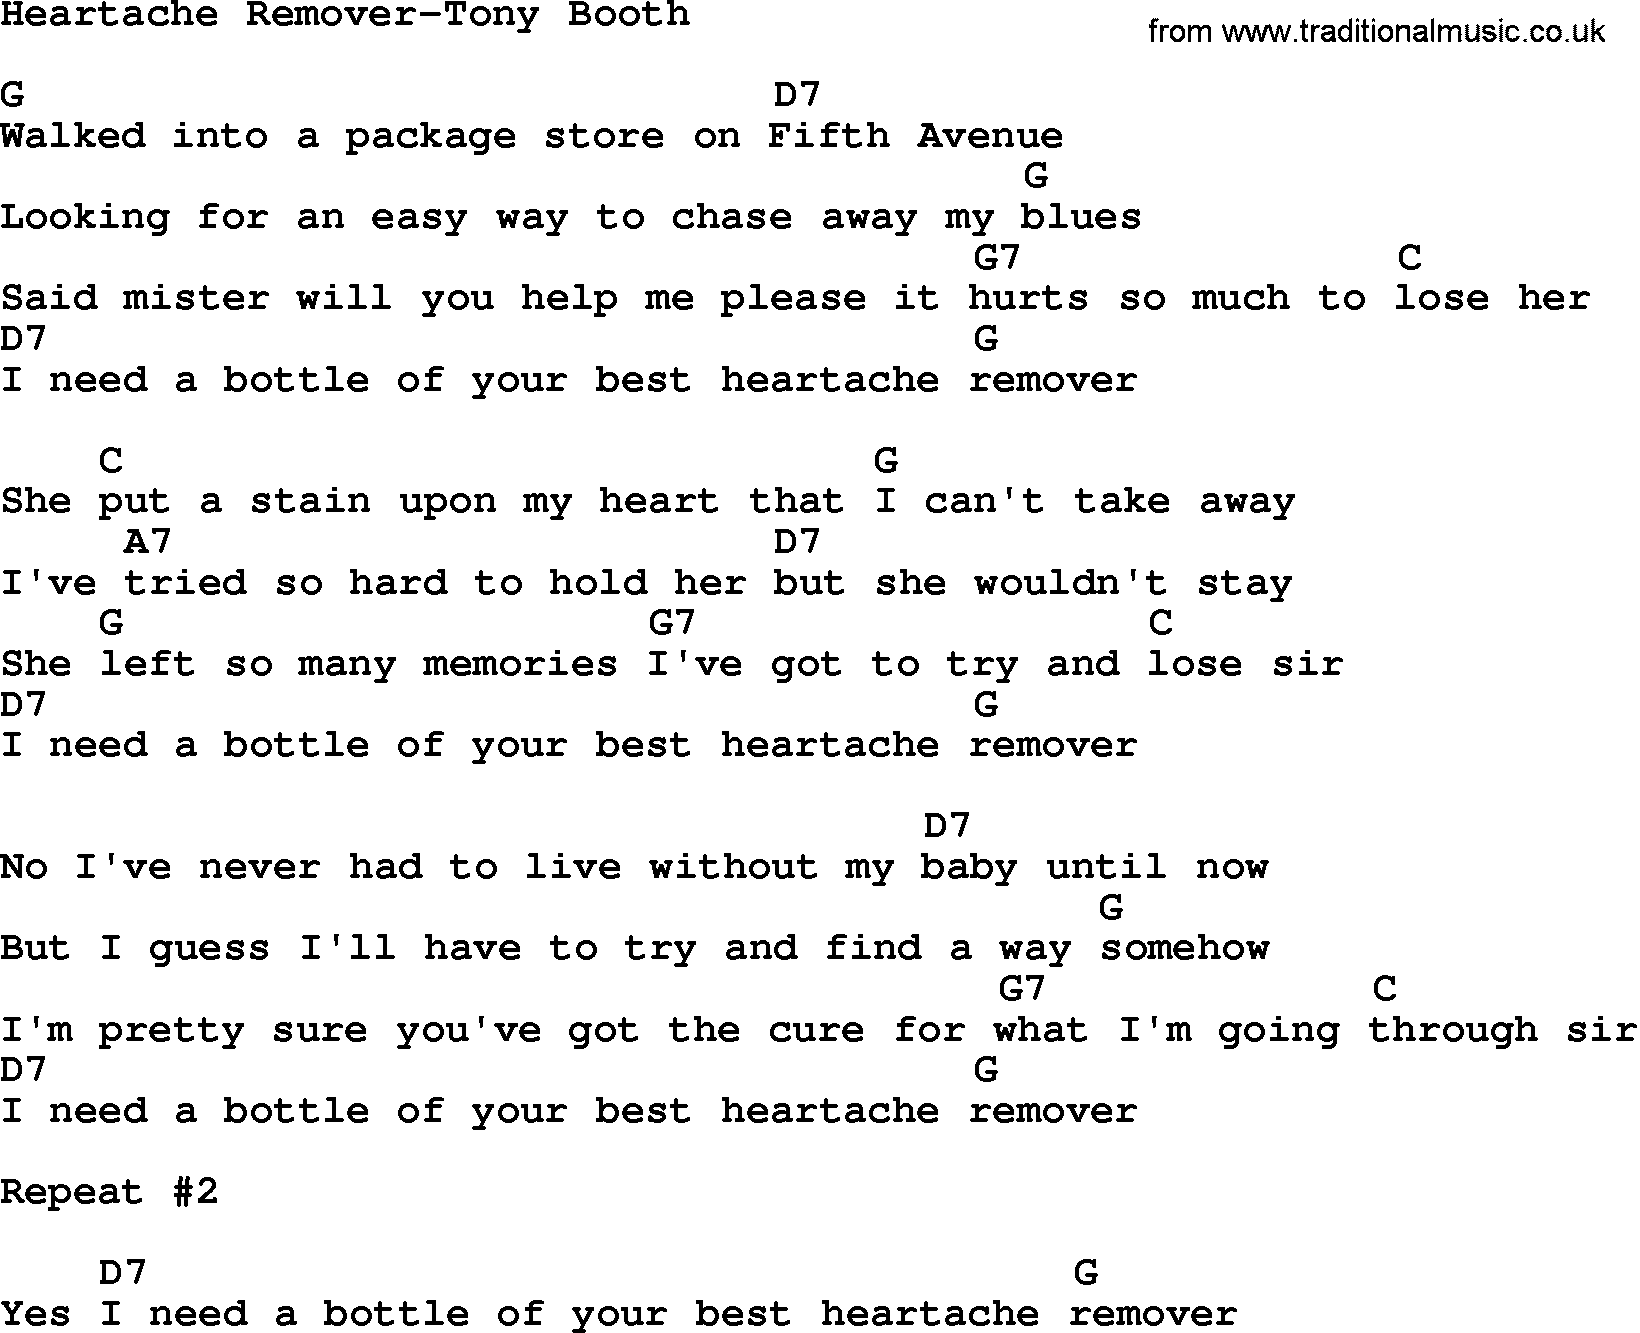 Country music song: Heartache Remover-Tony Booth lyrics and chords